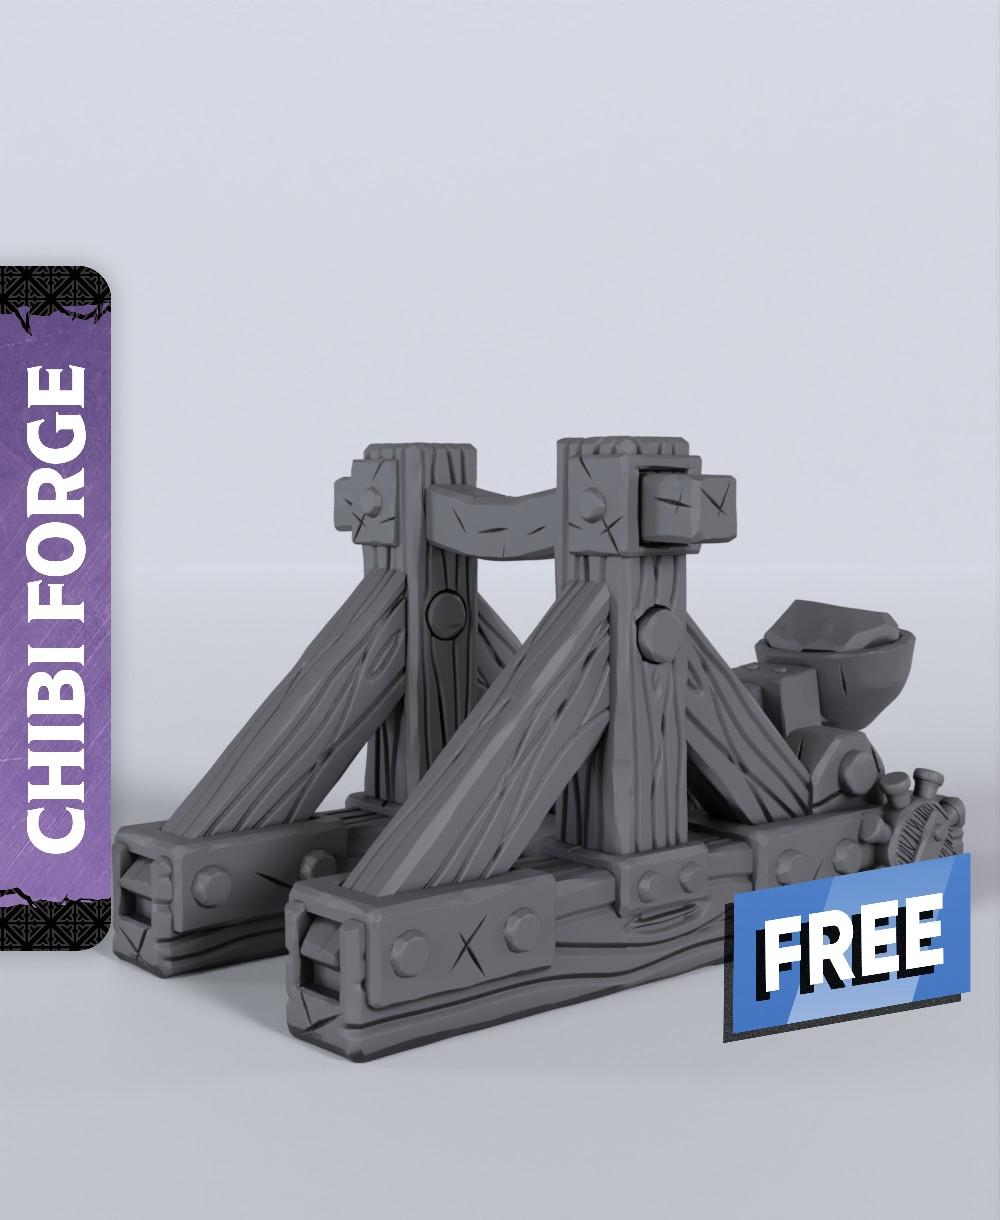 Catapult - With Free Dragon Warhammer - 5e DnD Inspired for RPG and Wargamers 3d model